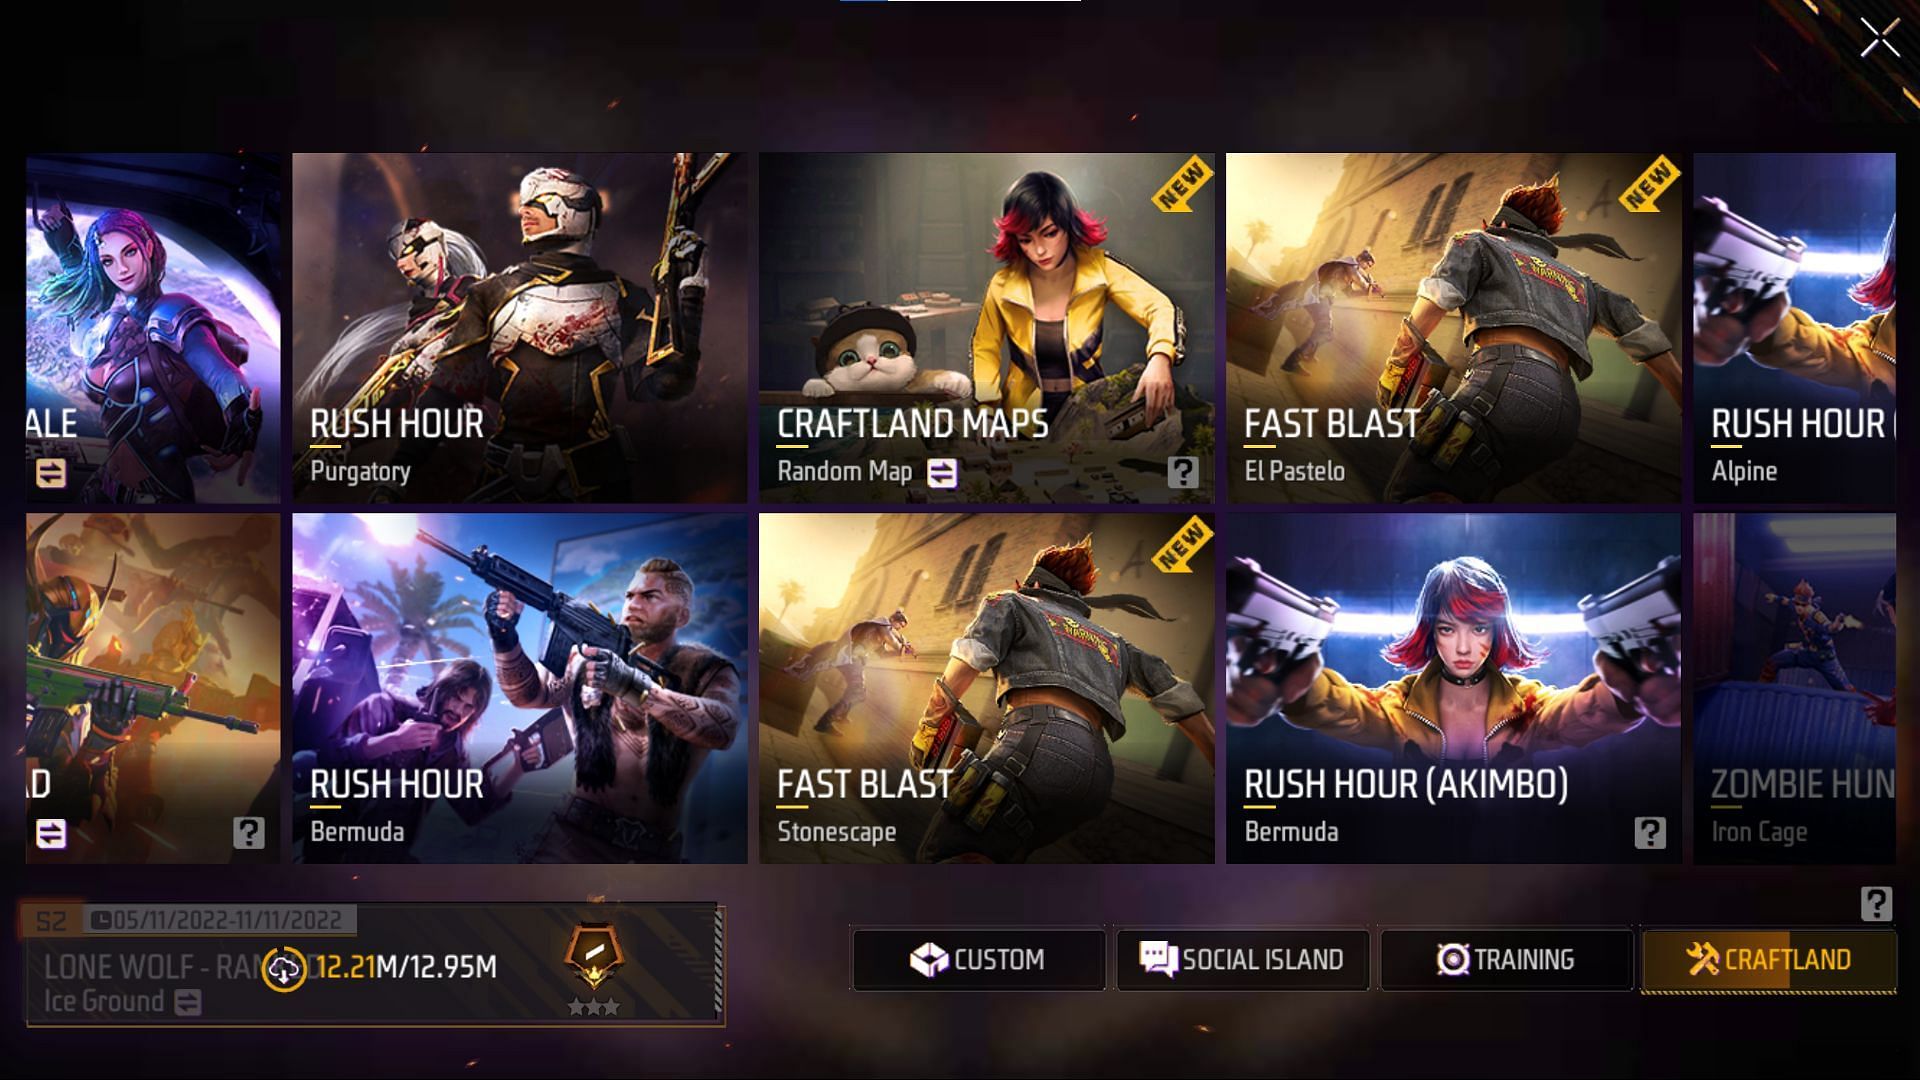 Several game modes are available (Image via Garena)